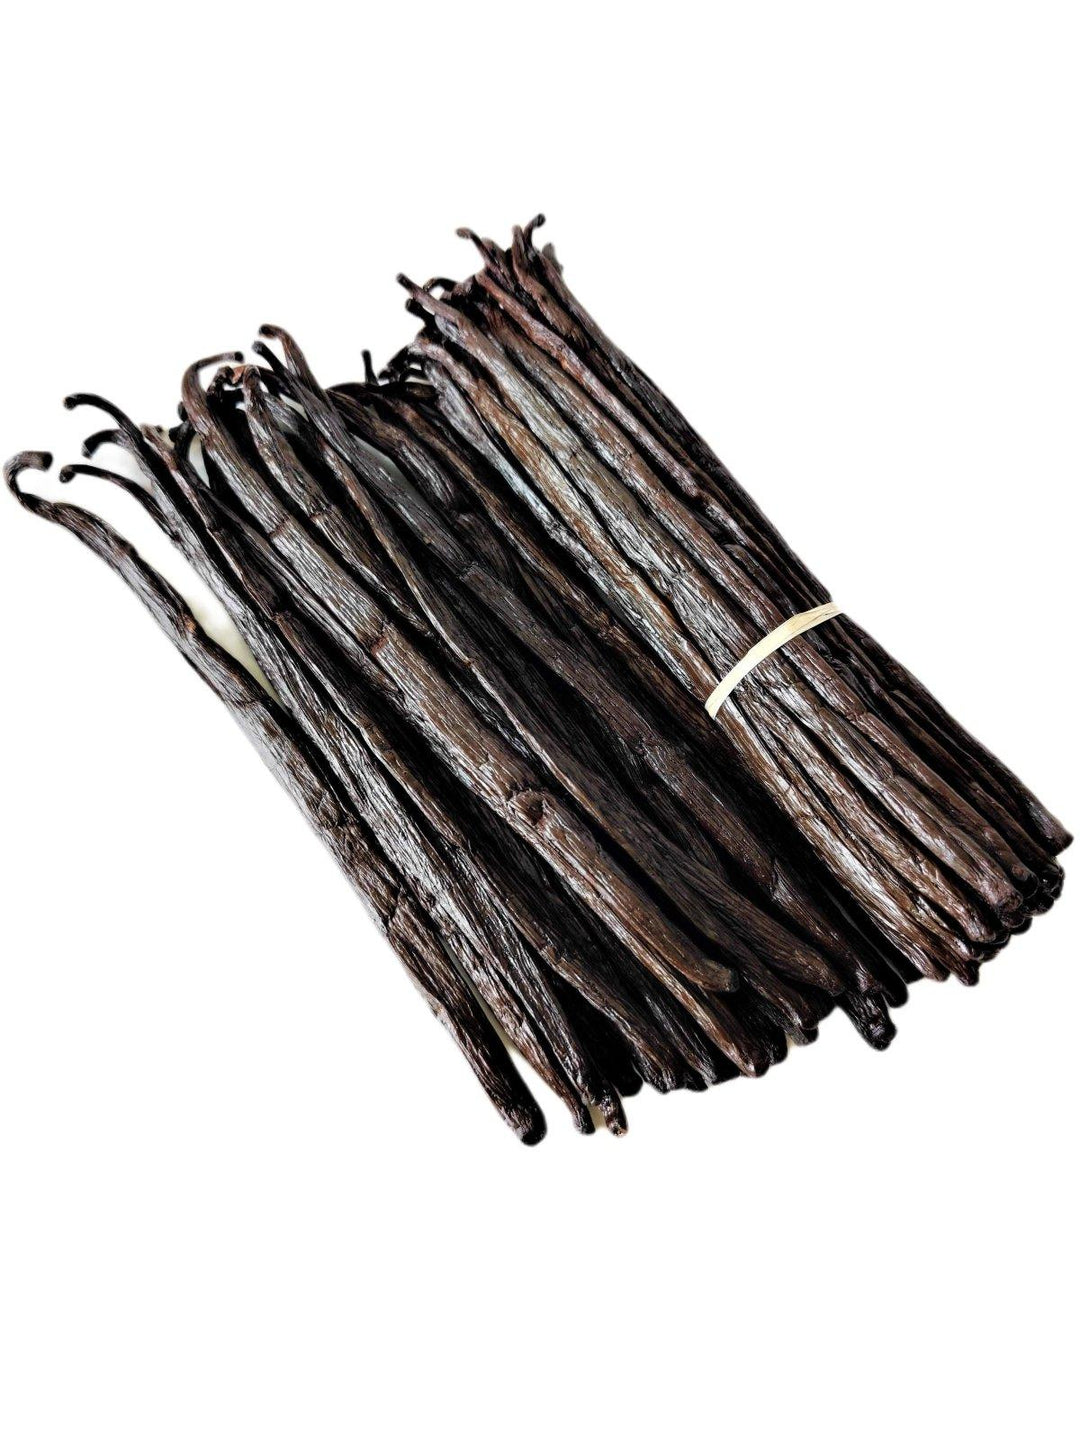 Madagascar Bourbon Vanilla Beans Gourmet Grade-A <br>For Extract And Baking<BR>5 count, 15 count, 25 count, 50 count, 100 count